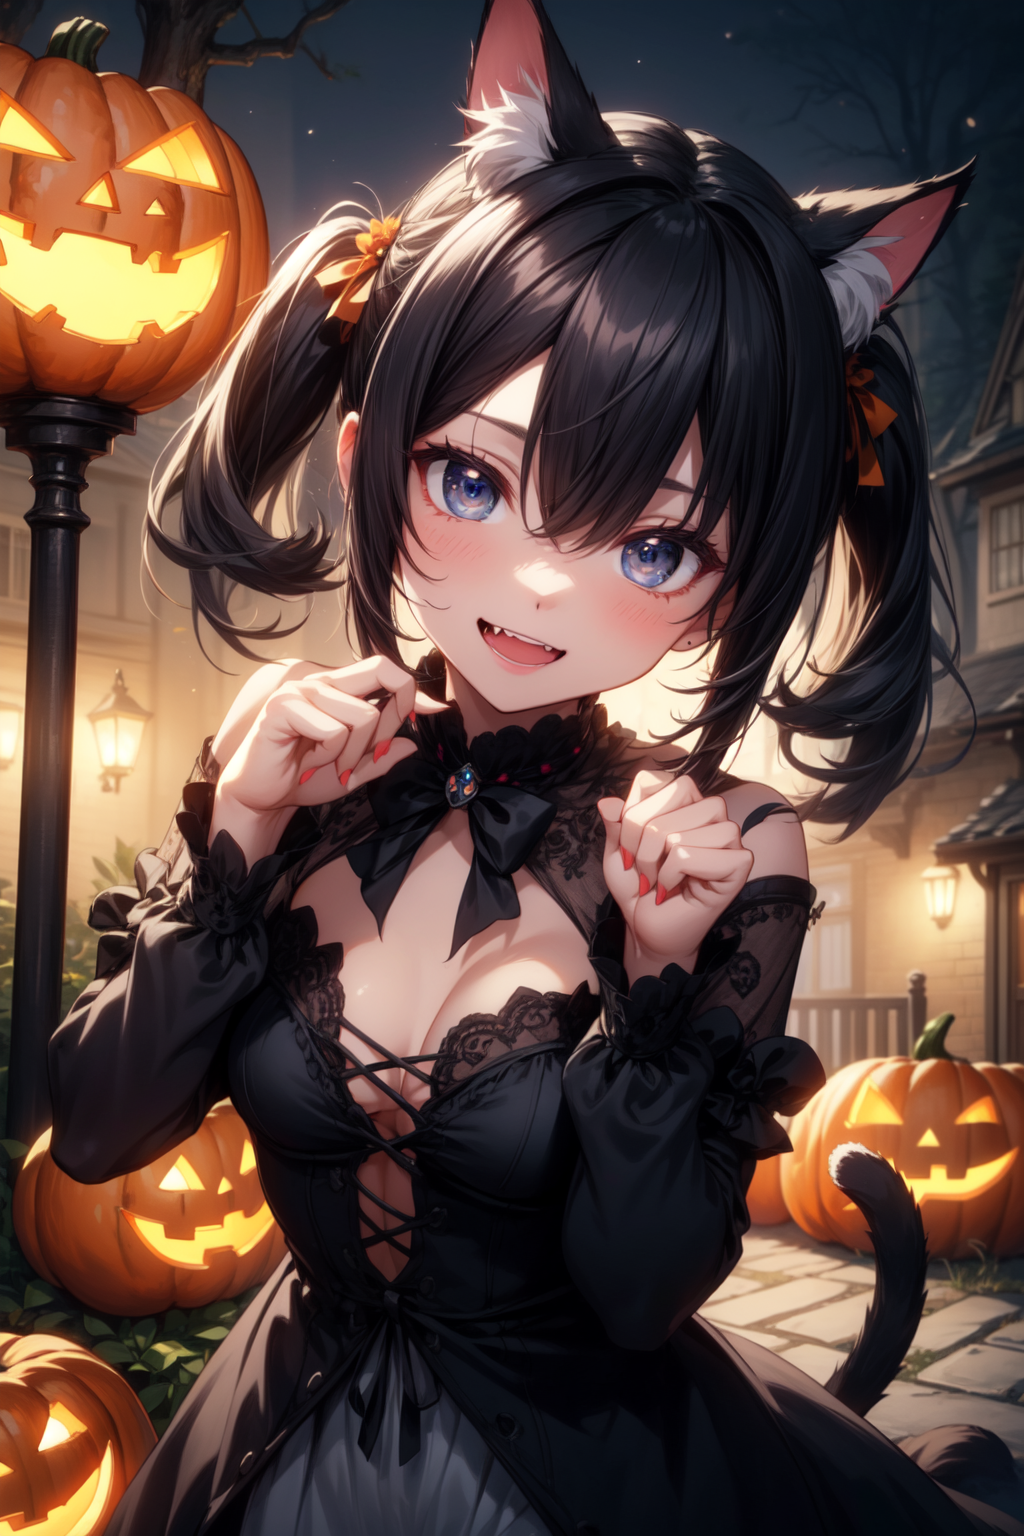 Cute Anime Cat Girl in Black Costume with Long Hair